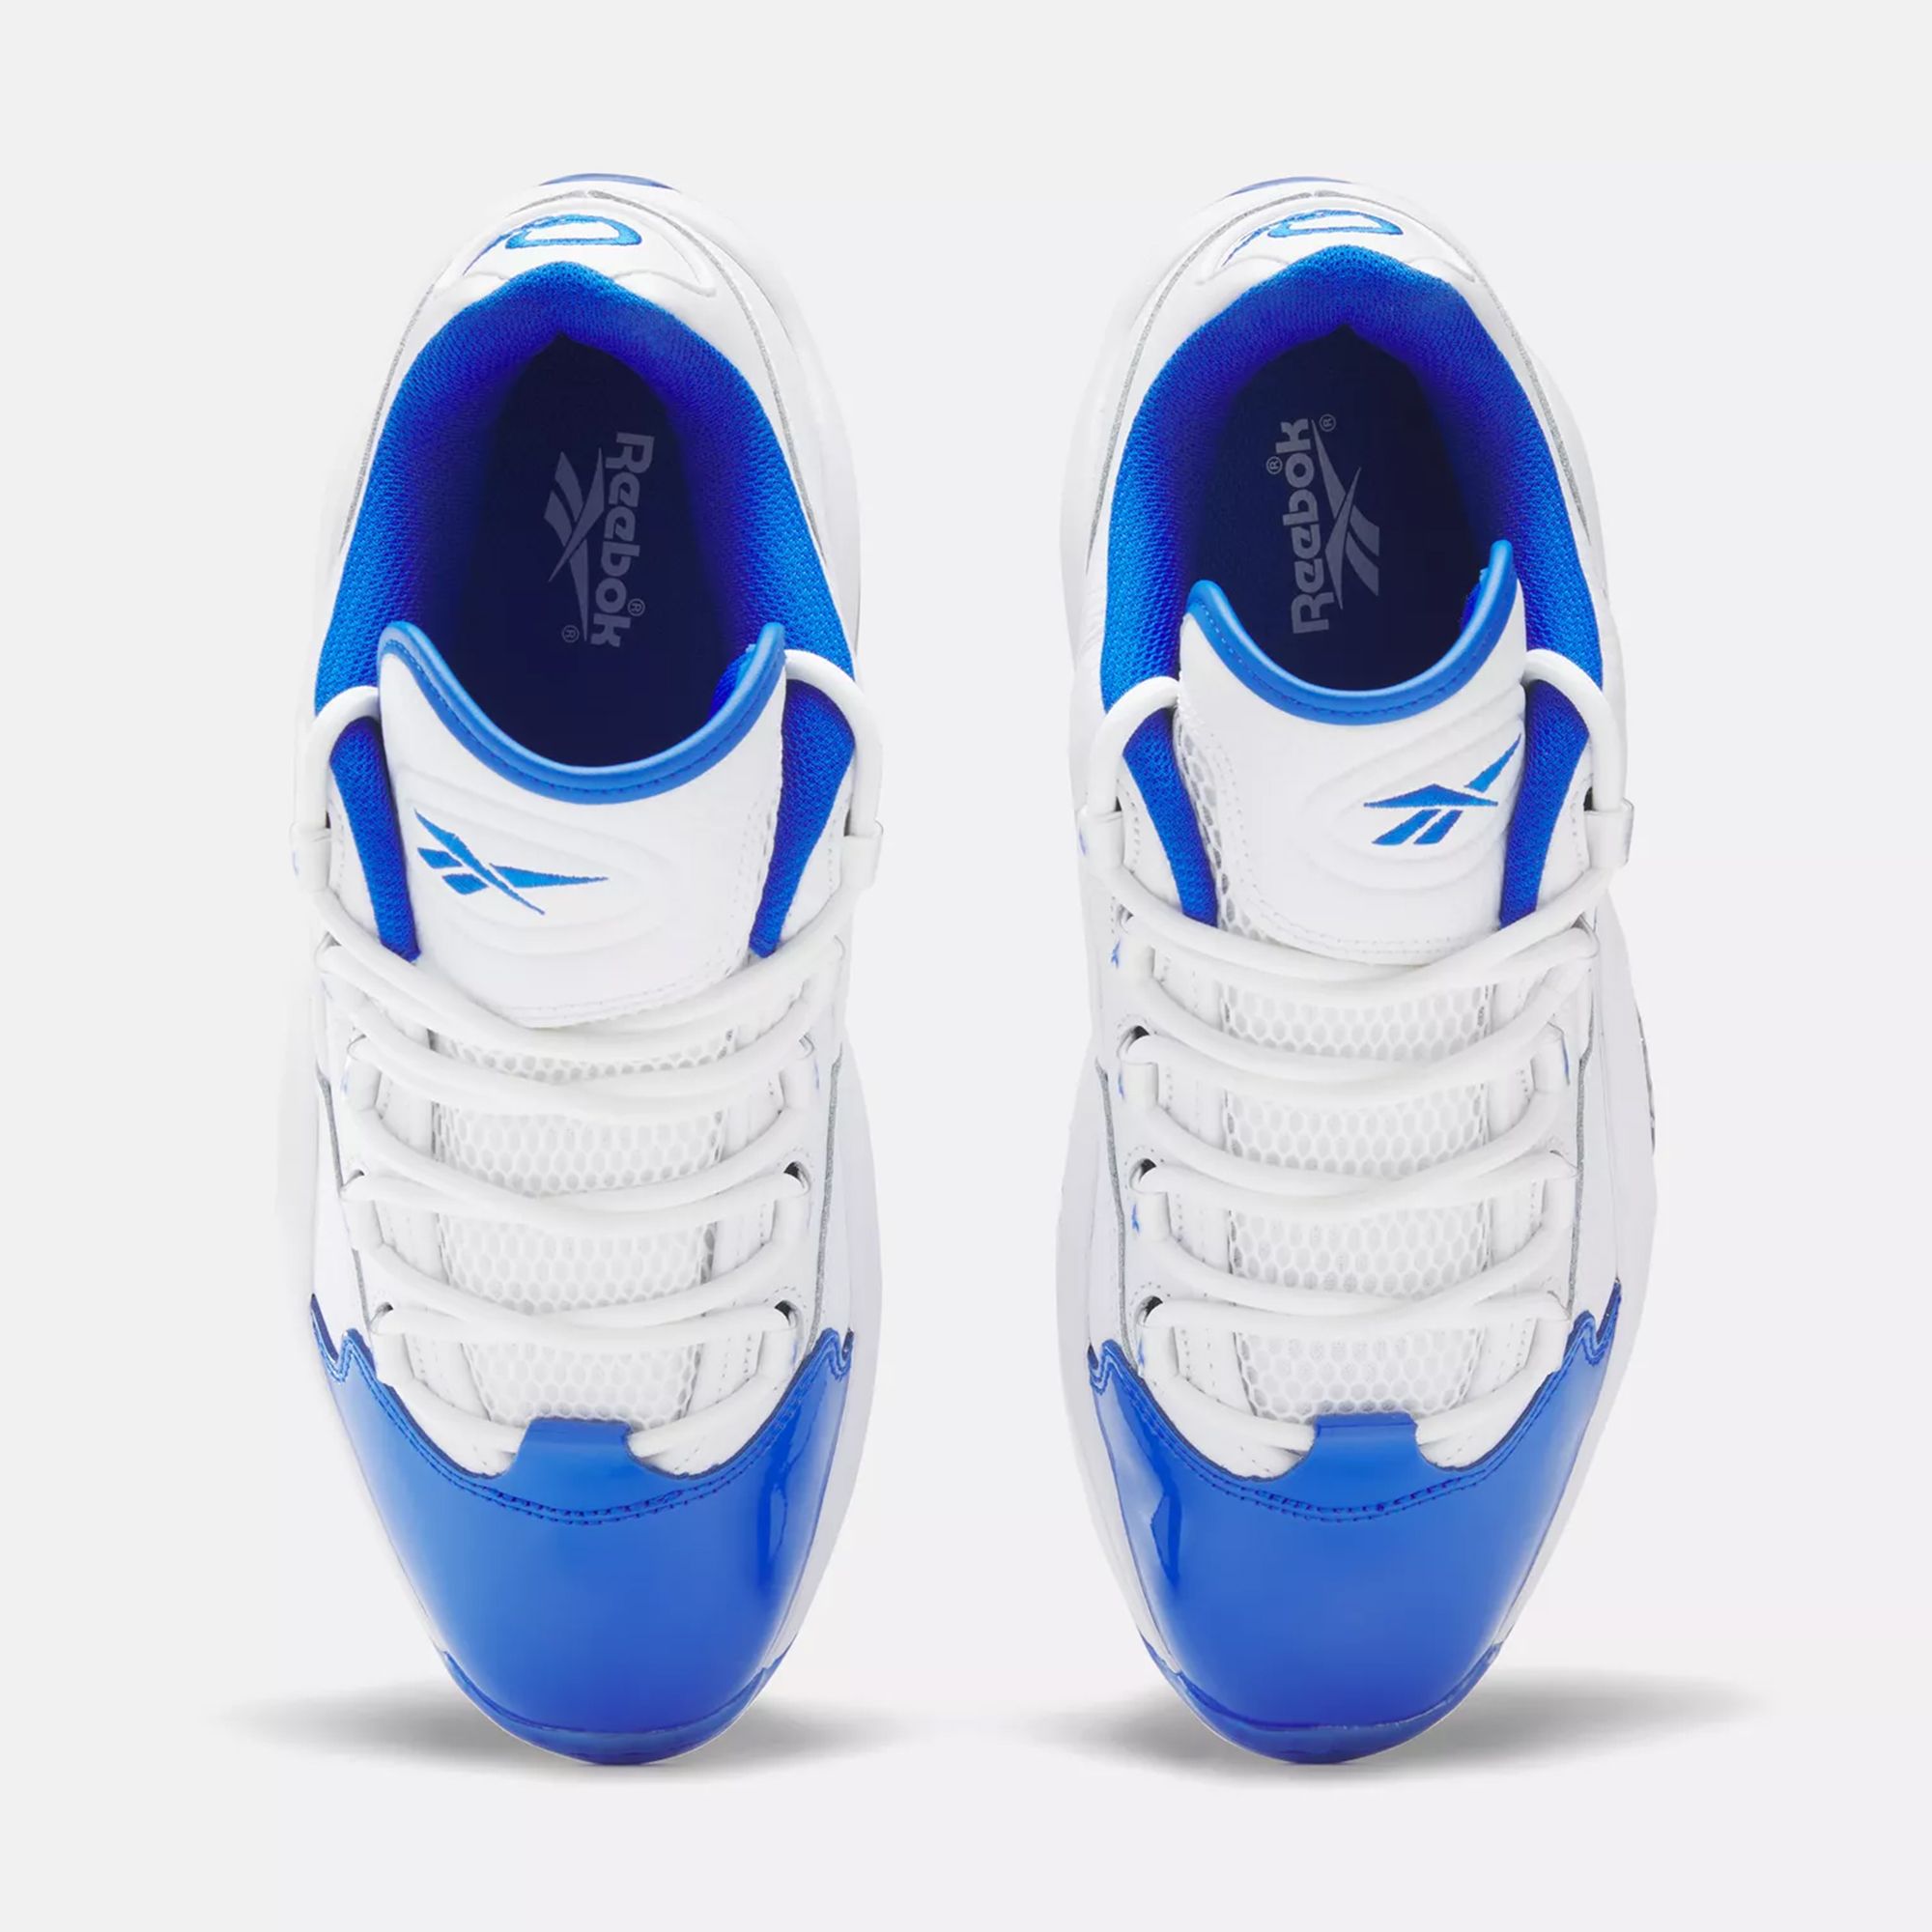 The Reebok Question Low Appears in Electric Cobalt